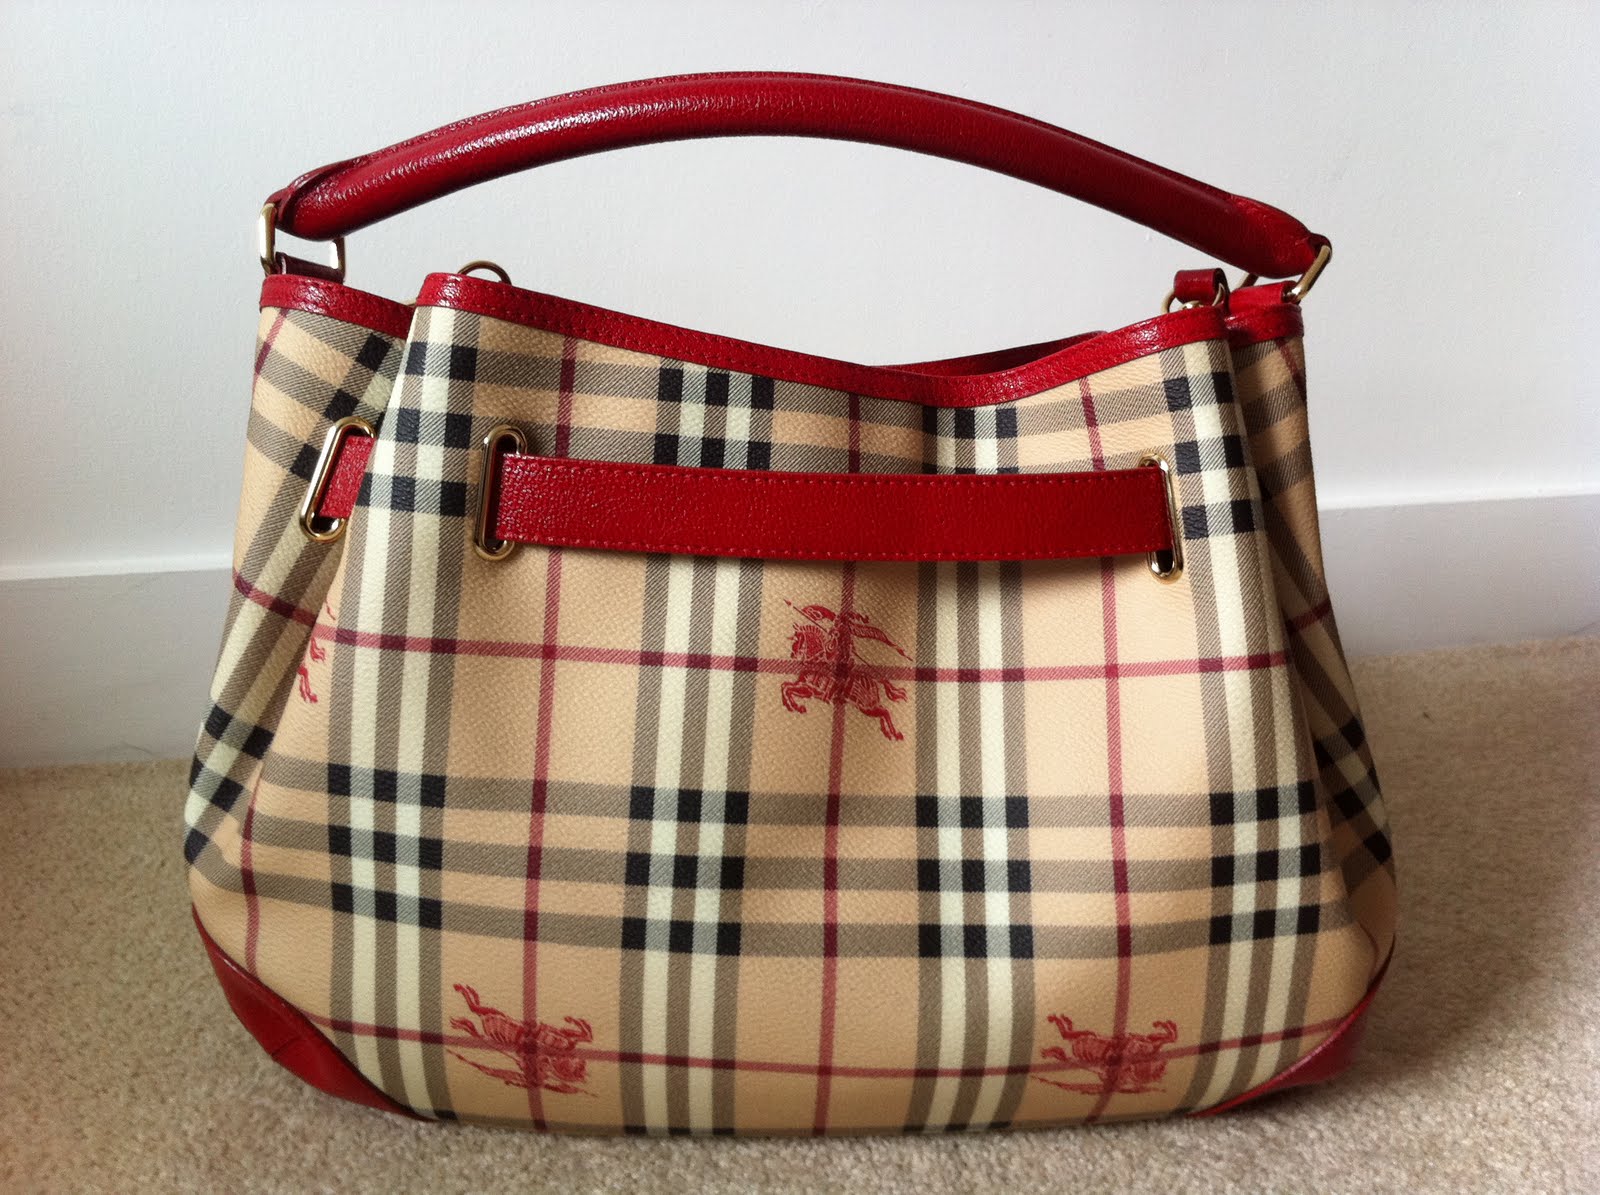 Discounted Genuine Handbags: (New) Authentic Burberry Hobo Bag For Sale